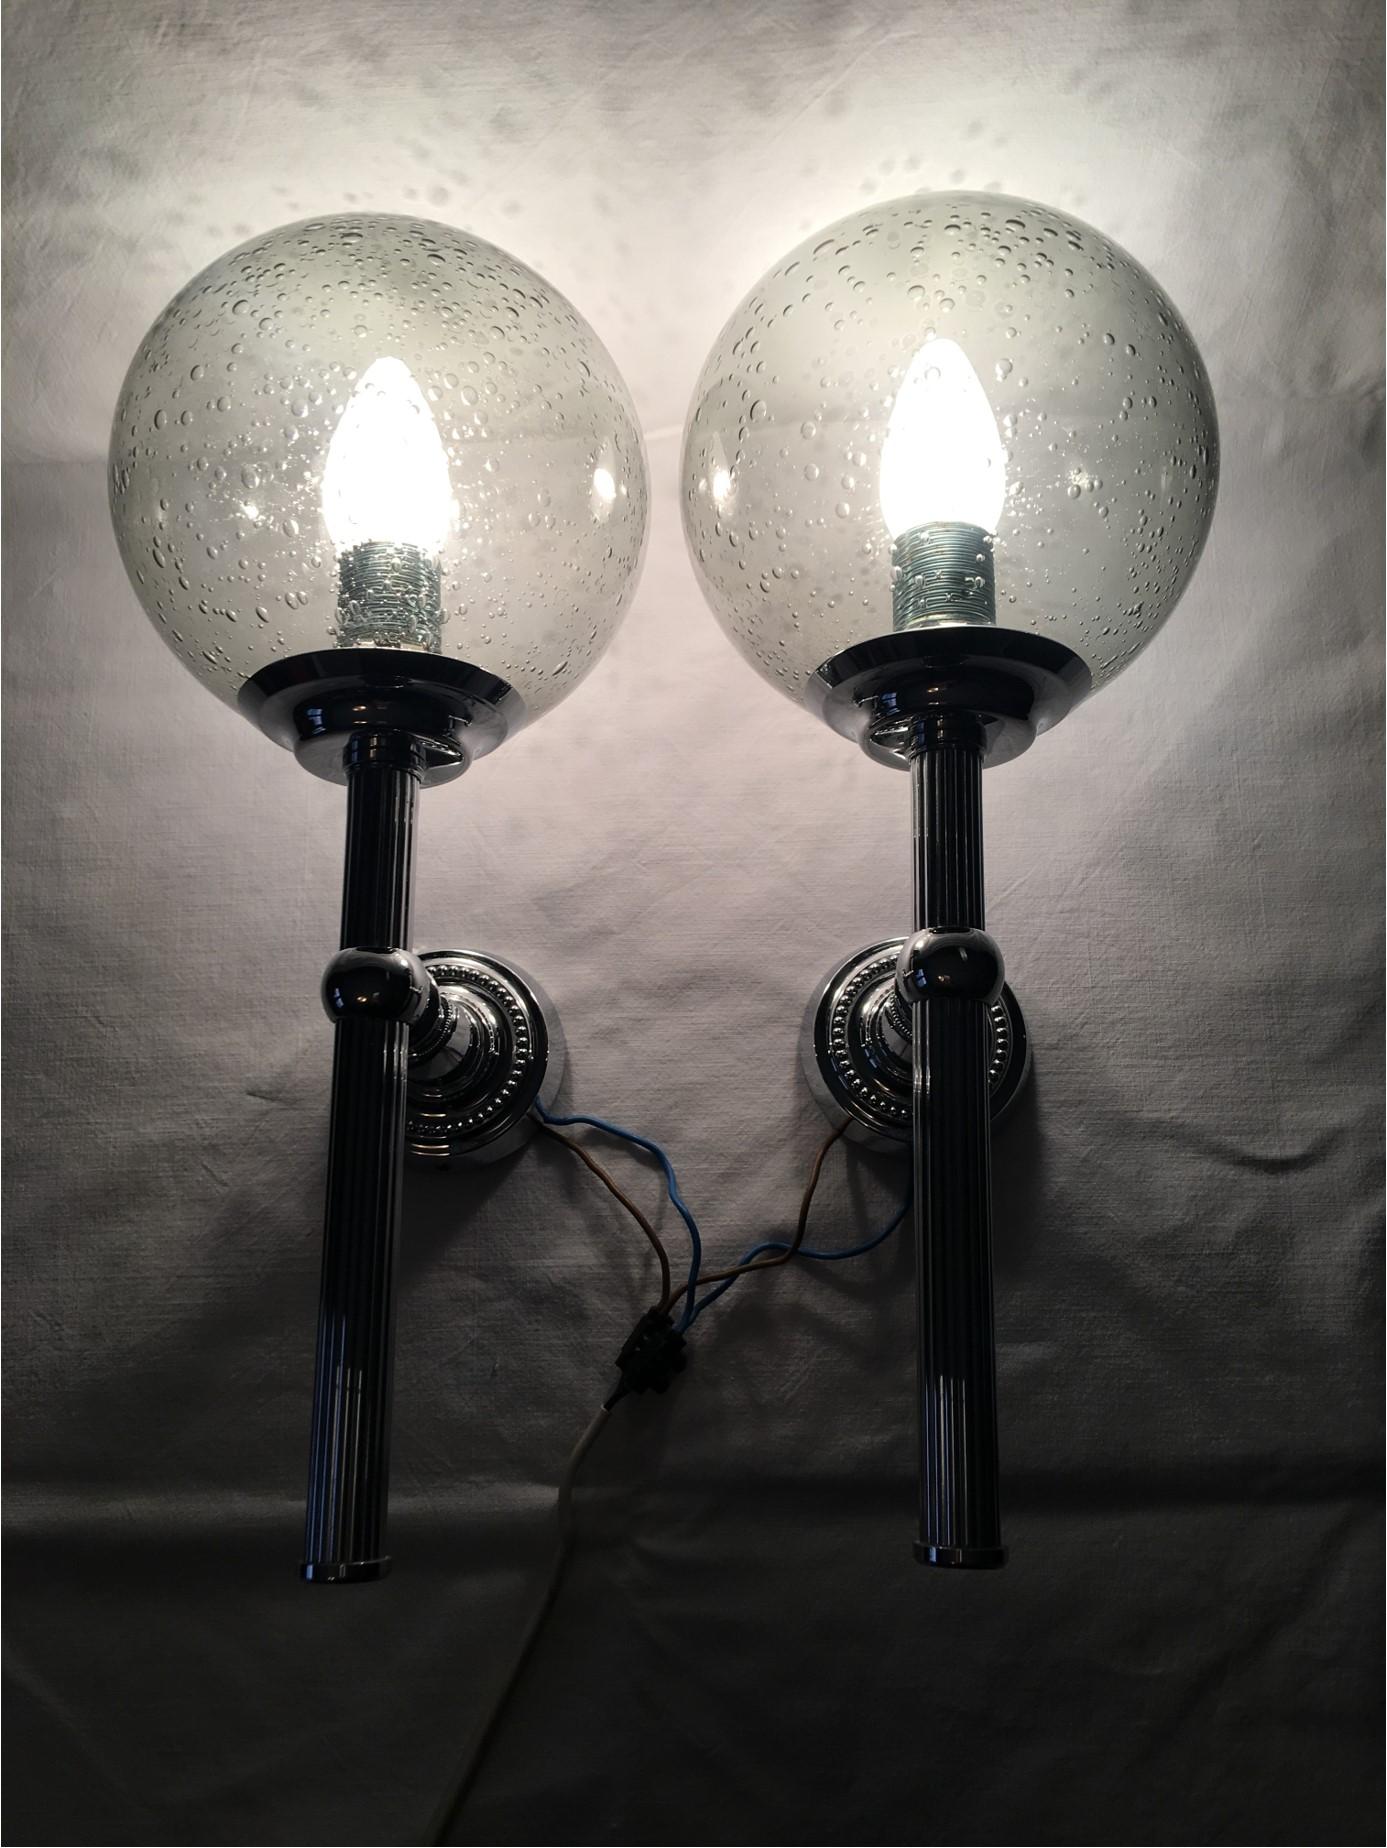 A unique and lovely pair of 1960s chrome and smoked air bubbles glass sconces from Germany. Very Art Deco looking fixtures are crowned with a lovely glass fitting complete with air bubbles that help create a magnificent lighting effect. Very nice